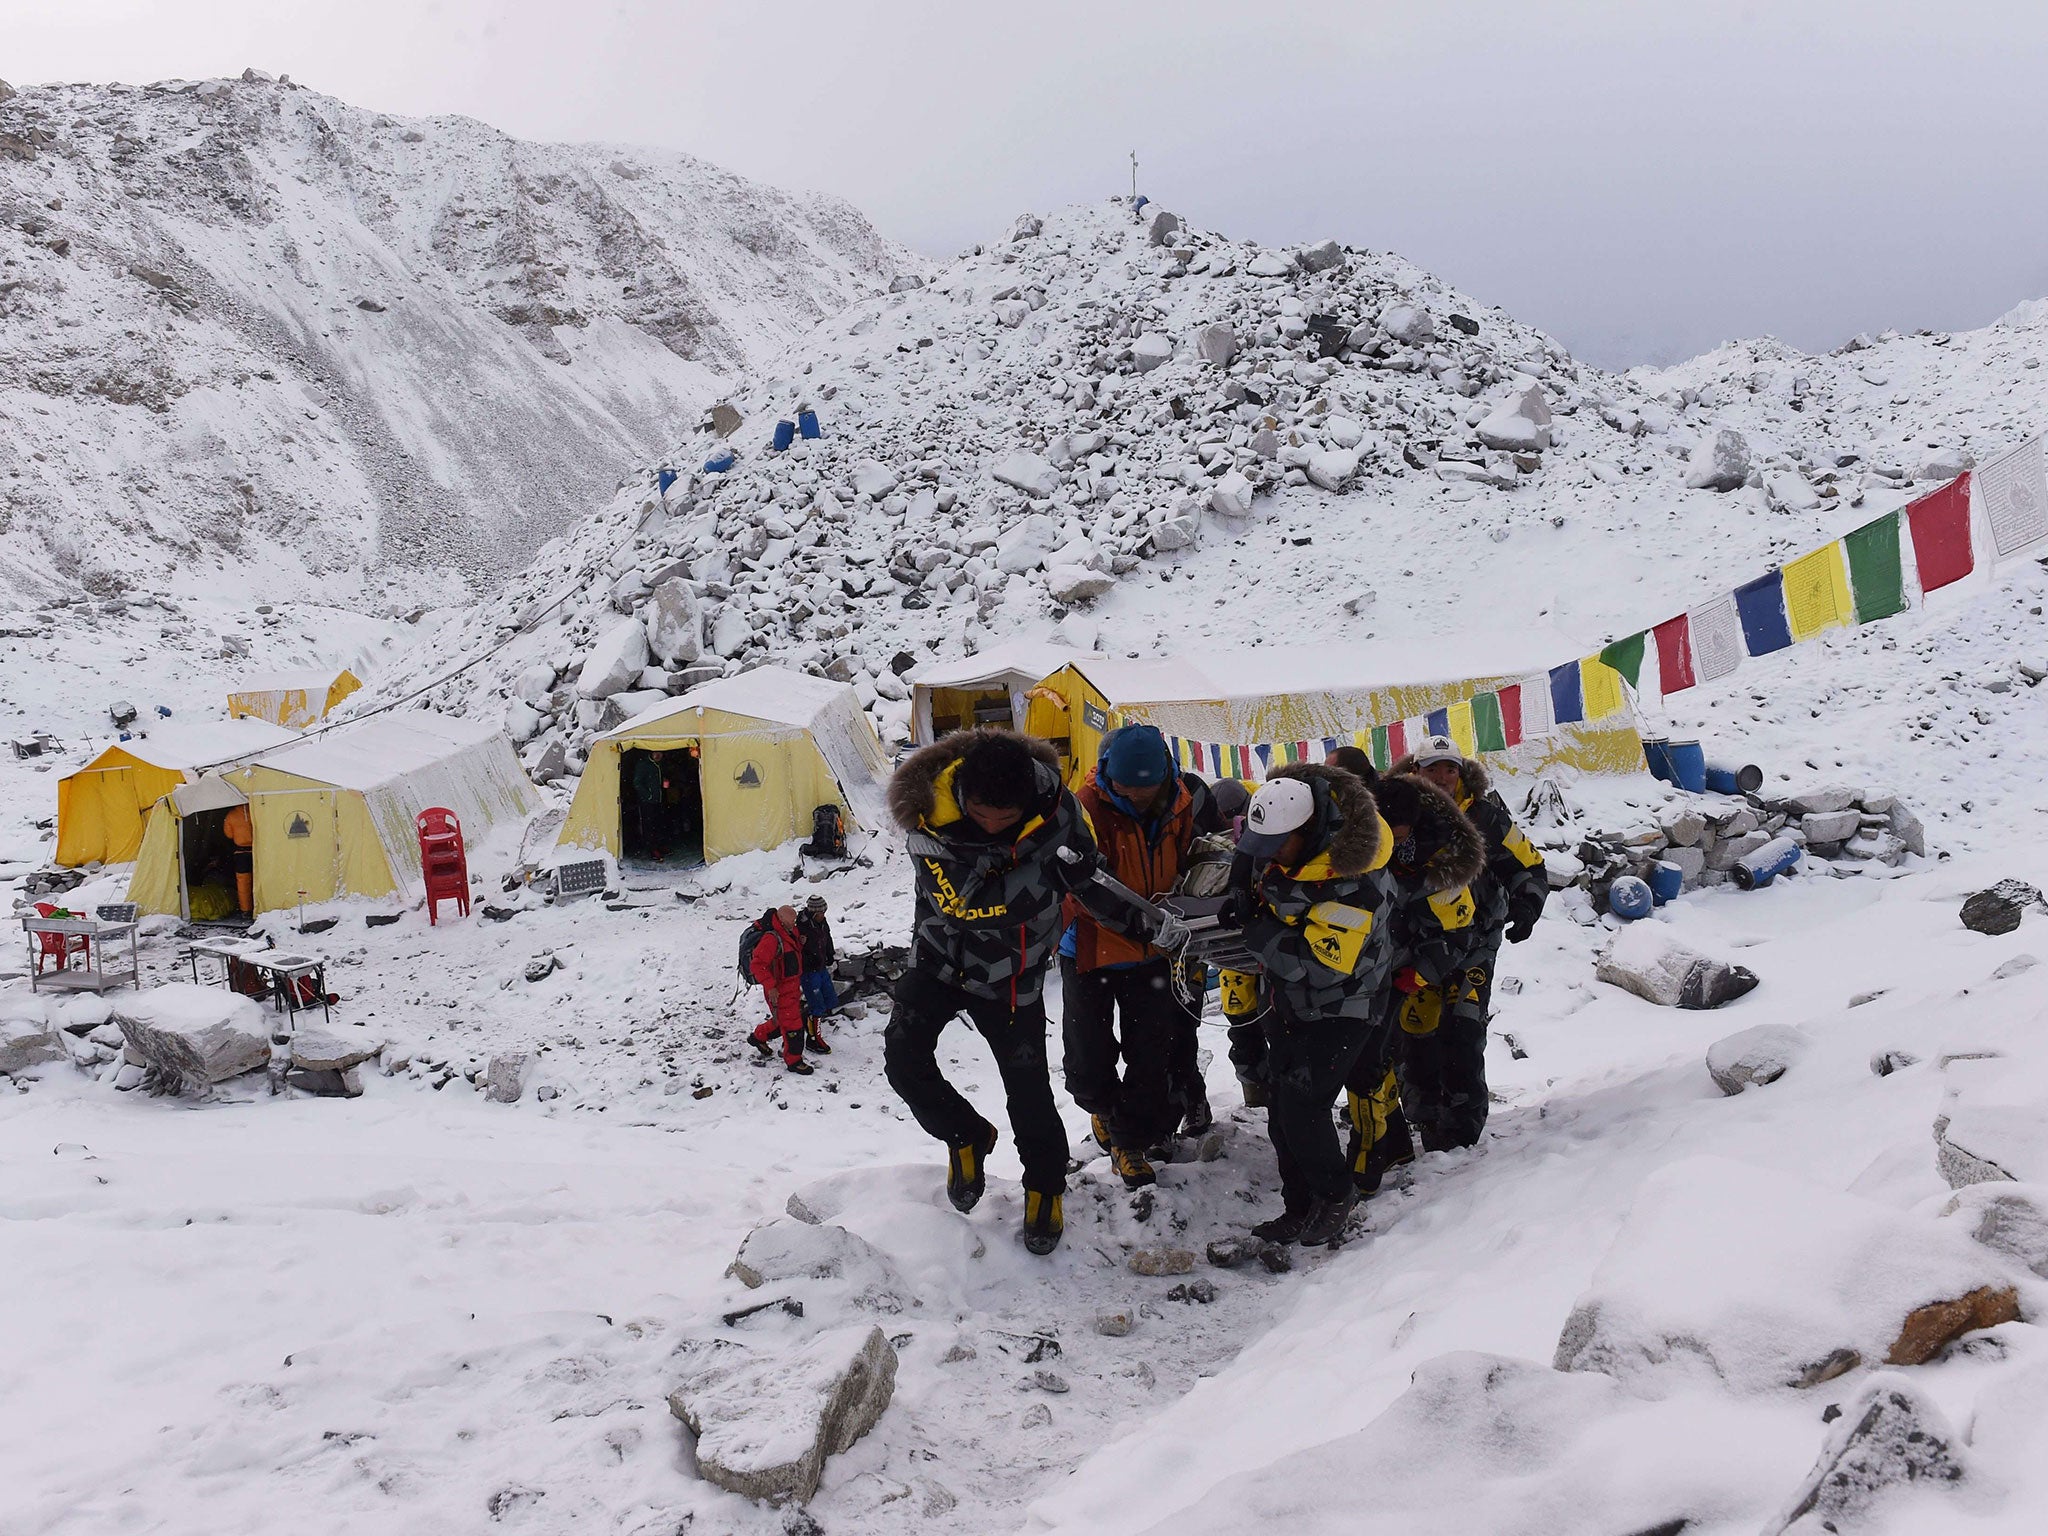 An injured person is carried to a helicopter to be airlifted out of Everest Base Camp, where 17 climbers were killed in avalanches triggered by the quake